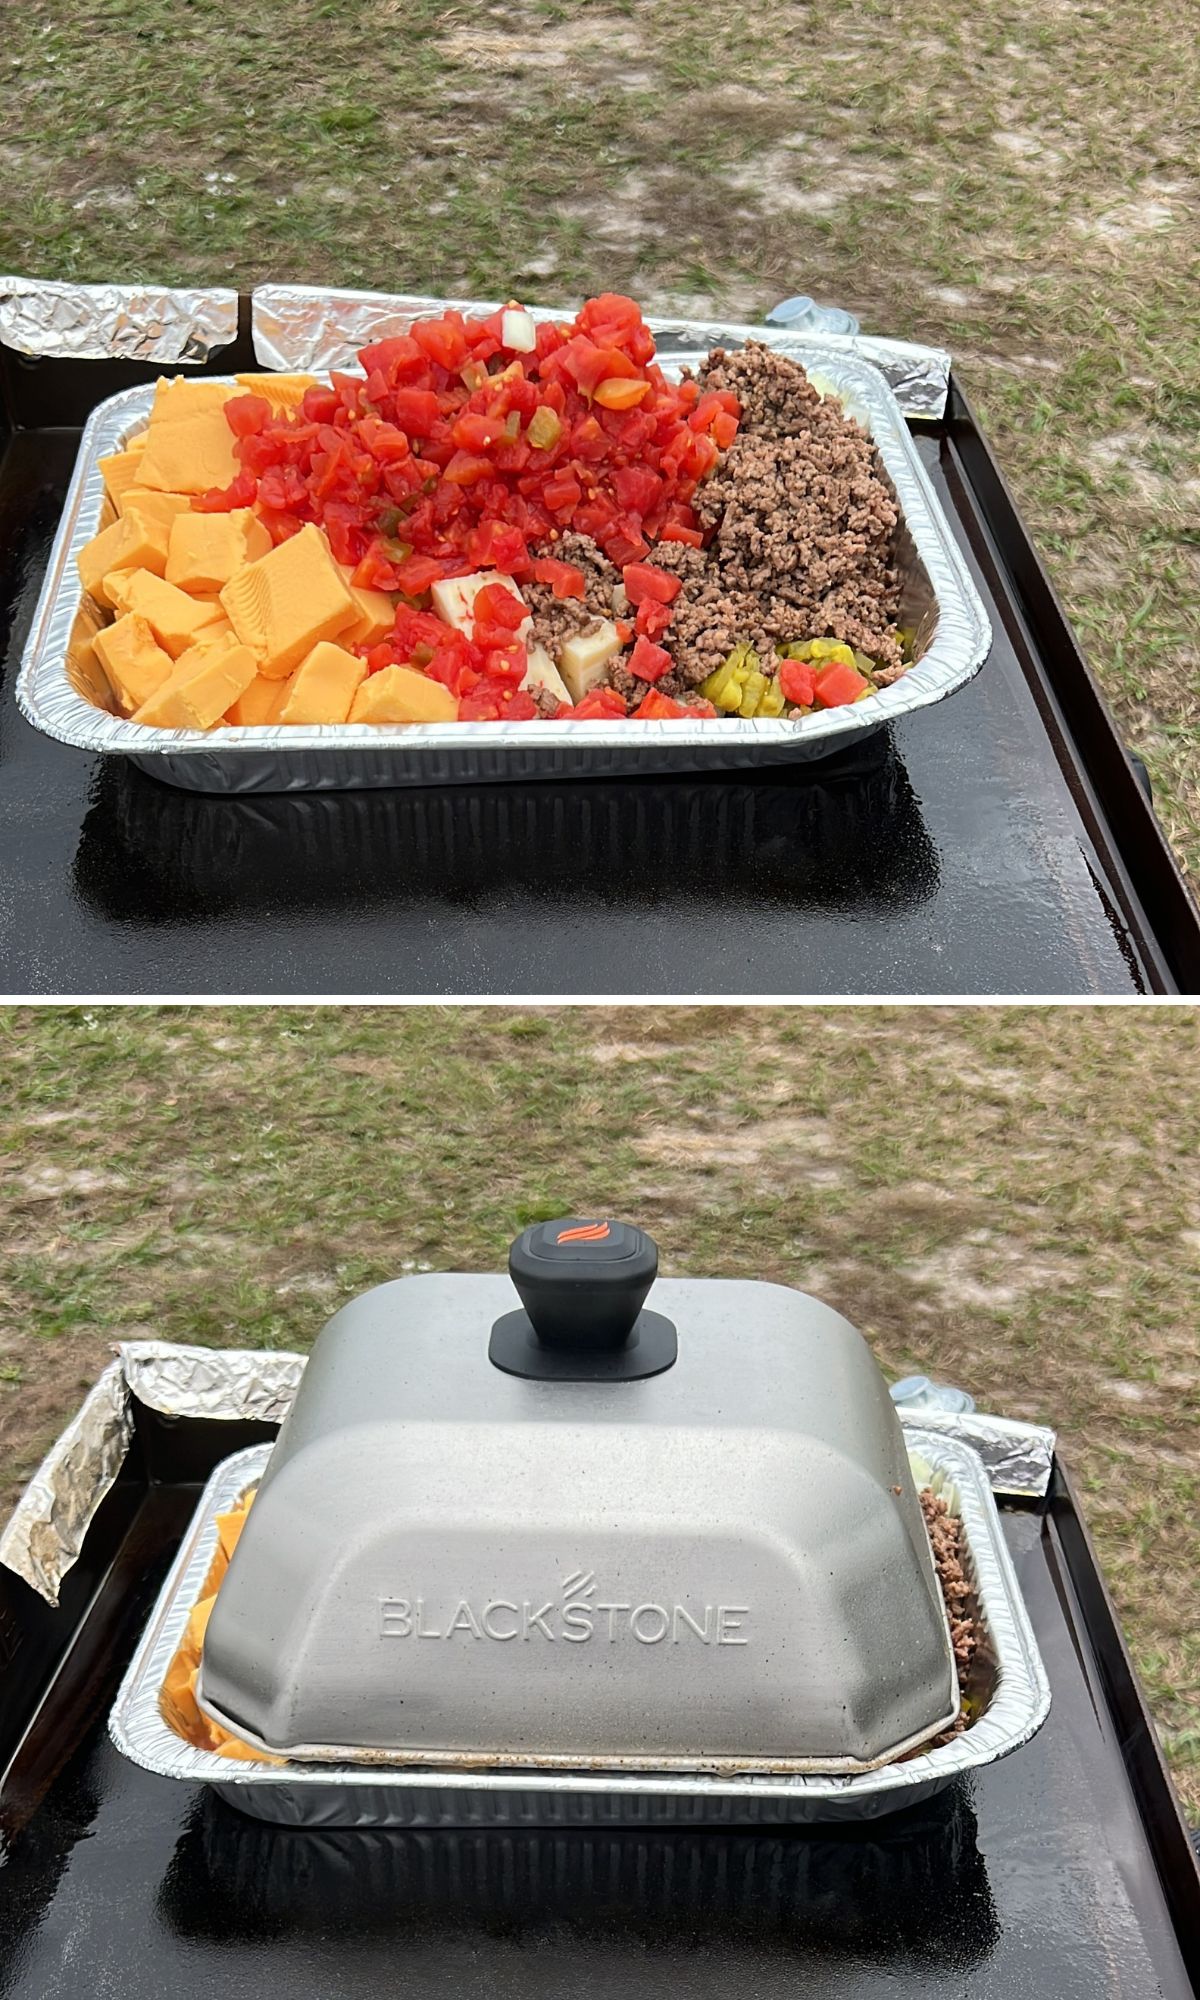 Two pictures of a blackstone grill pan with food in it.